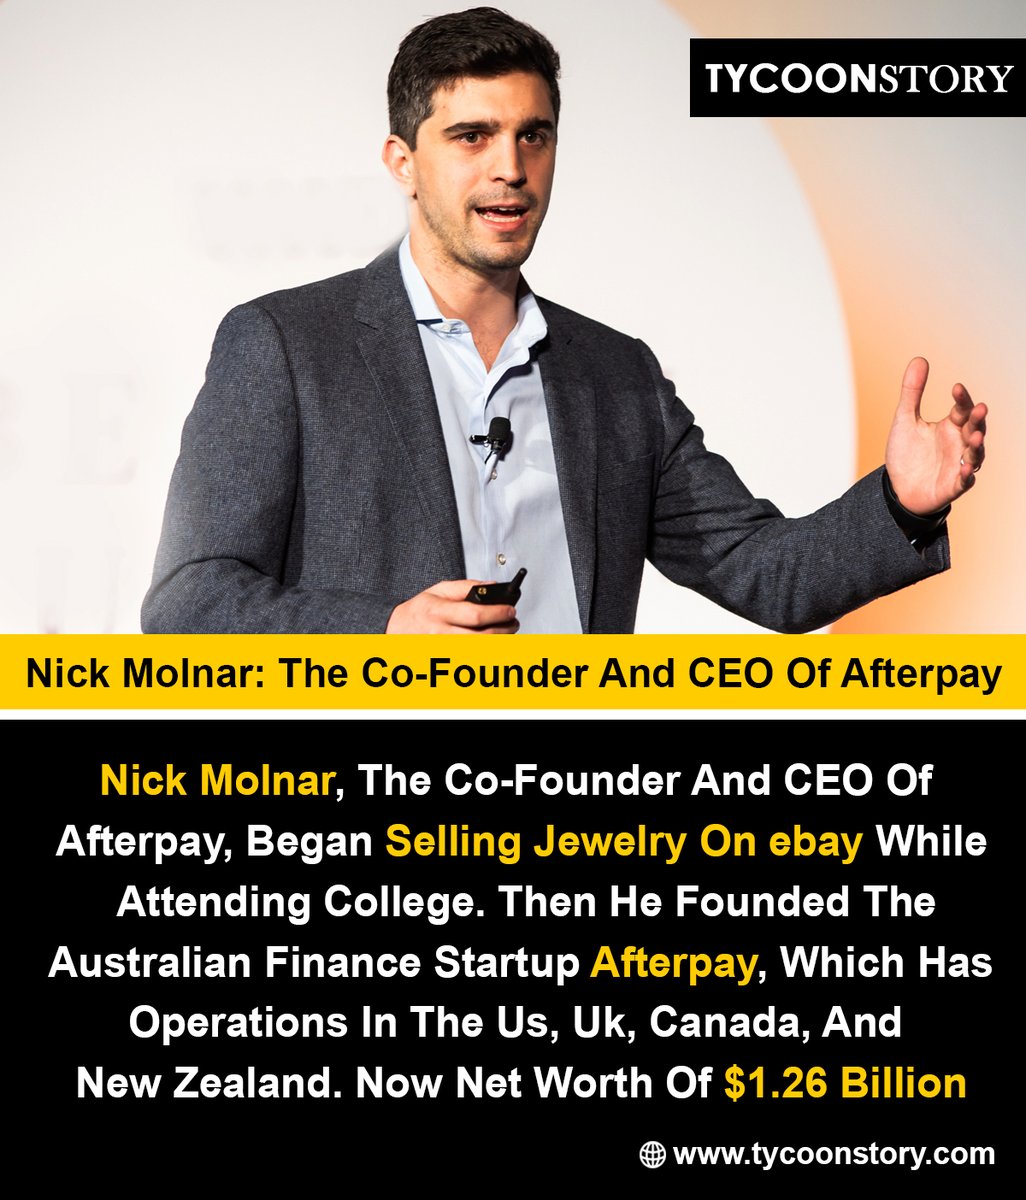 Nick Molnar Is The Ceo And Co-founder Of Afterpay
#NickMolnar #Afterpay #Fintech #Payments #Square #Entrepreneurship #BusinessSuccess #Millennials #Retail #Innovation #GlobalExpansion #FinancialTechnology #StartupSuccess #BusinessGrowth @AfterpayUSA 
tycoonstory.com